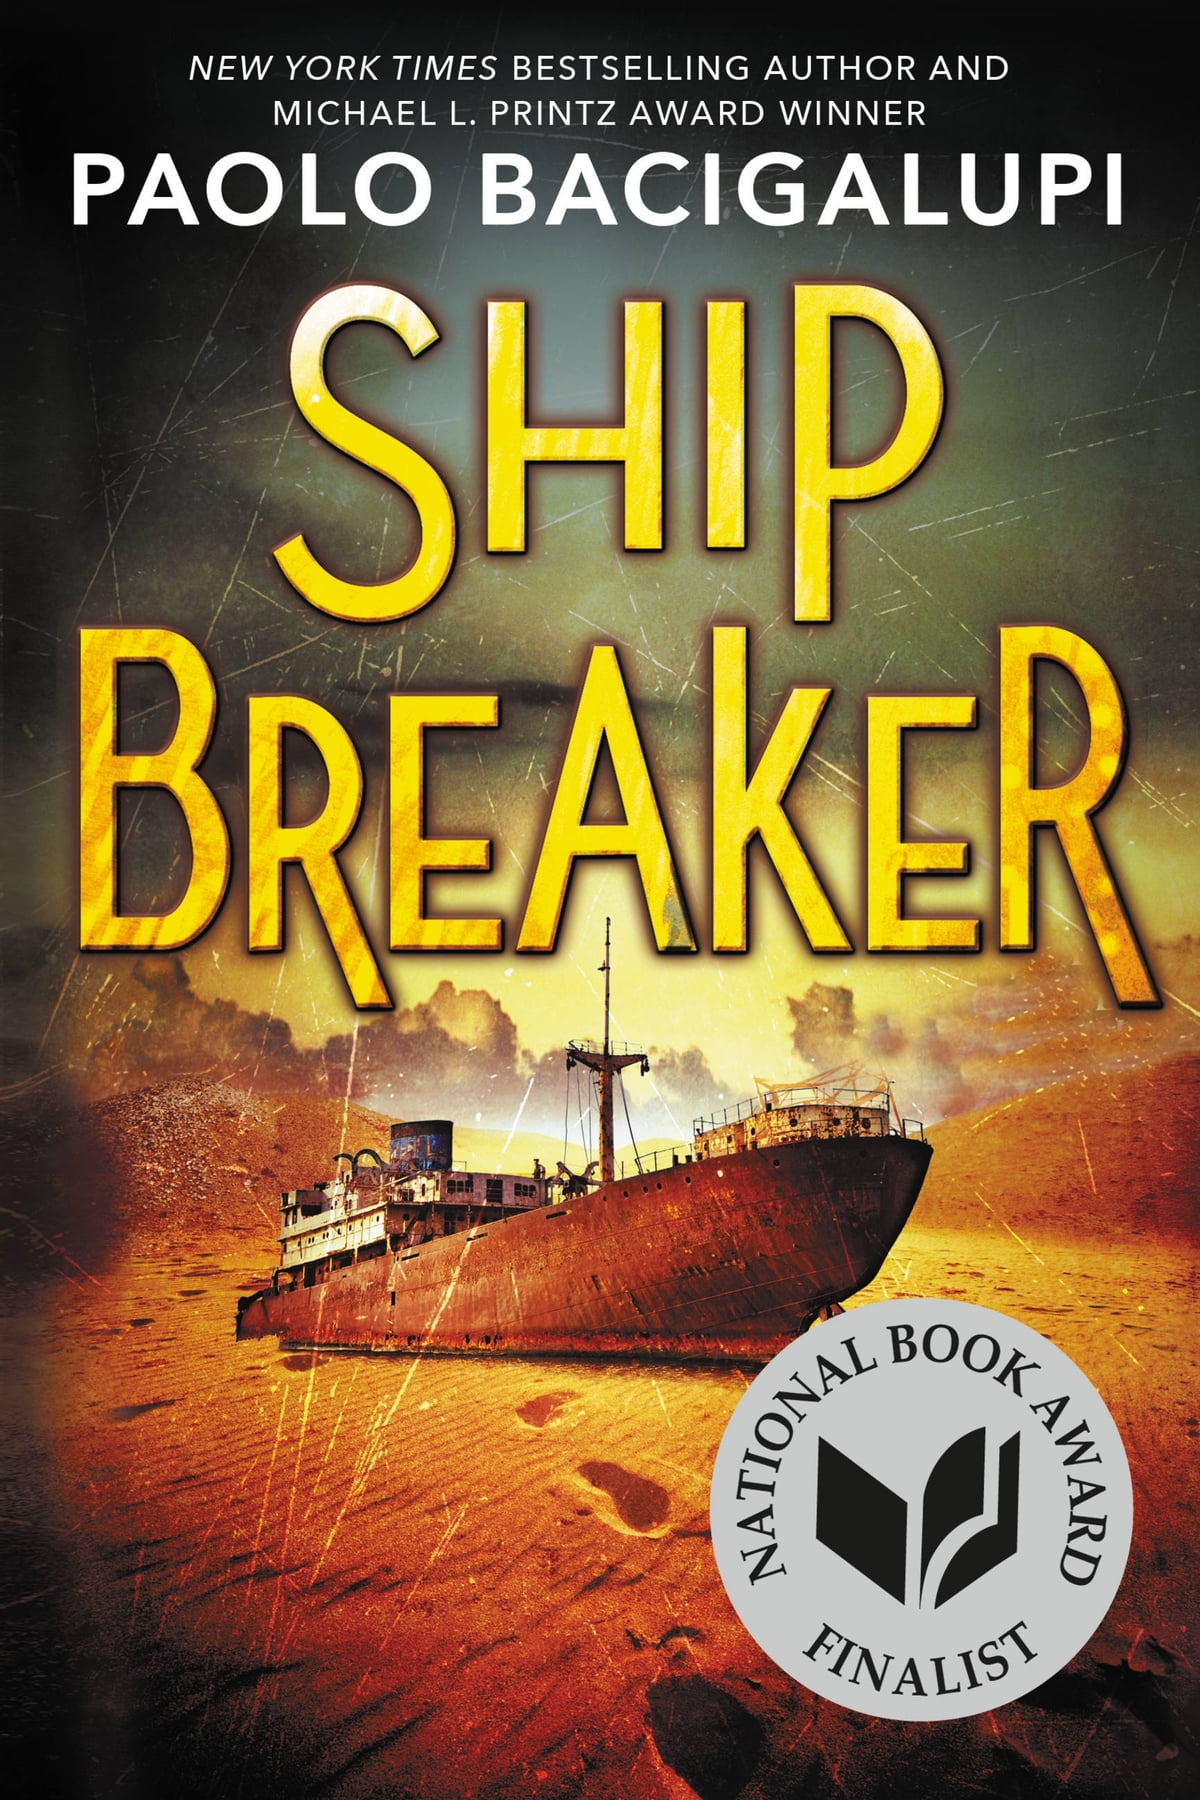 Paolo Bacigalupi: Ship Breaker (2010, Little, Brown Books for Young Readers)